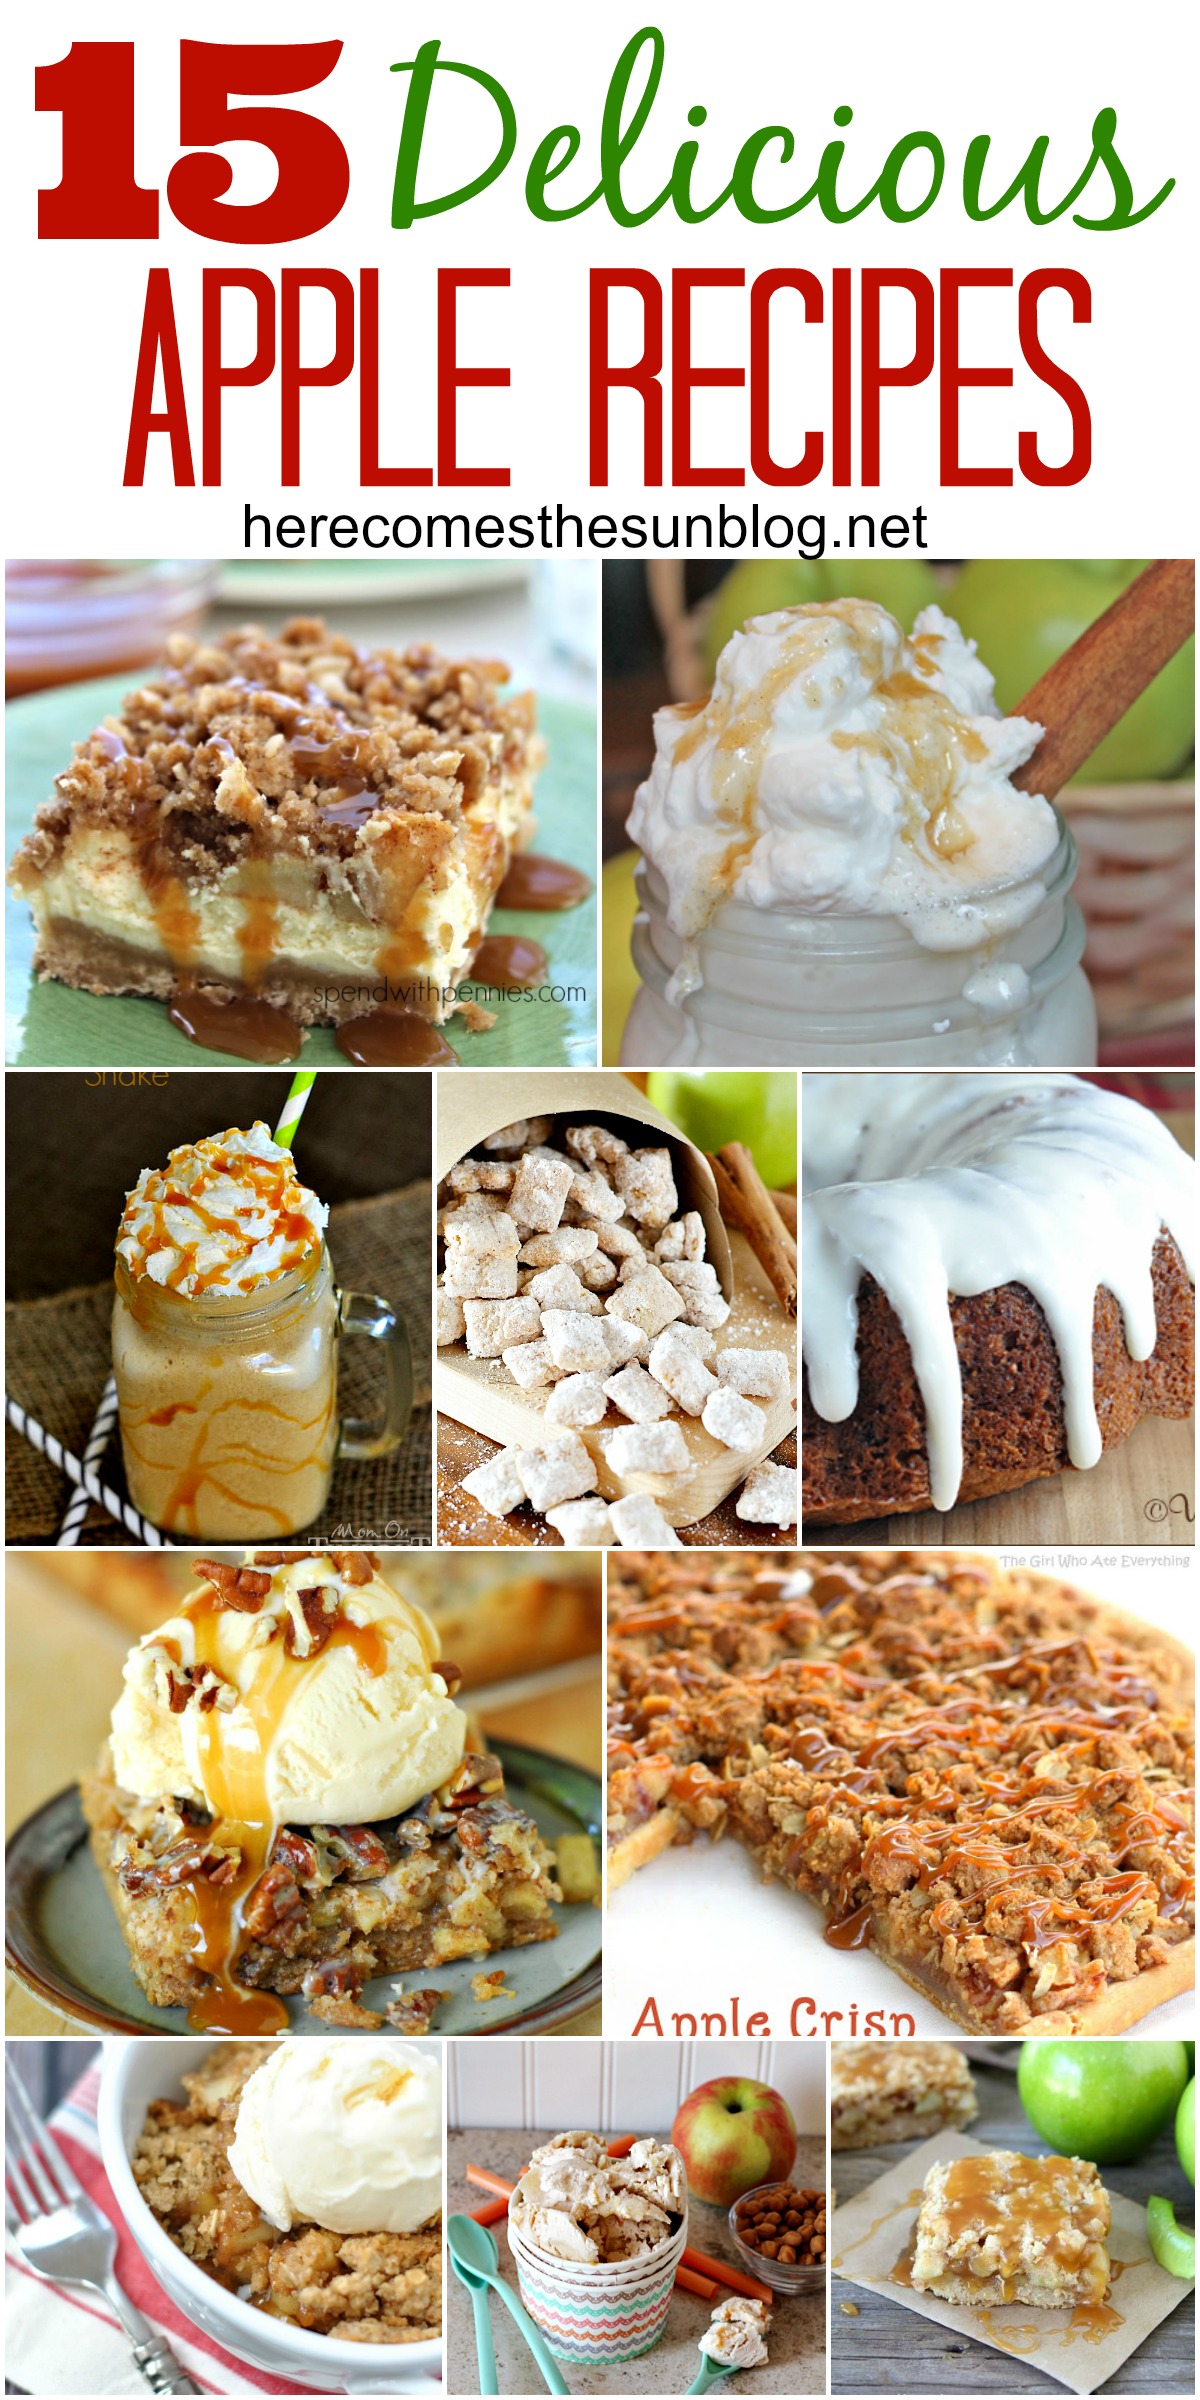 15 Delicious Apple Recipes for Fall!